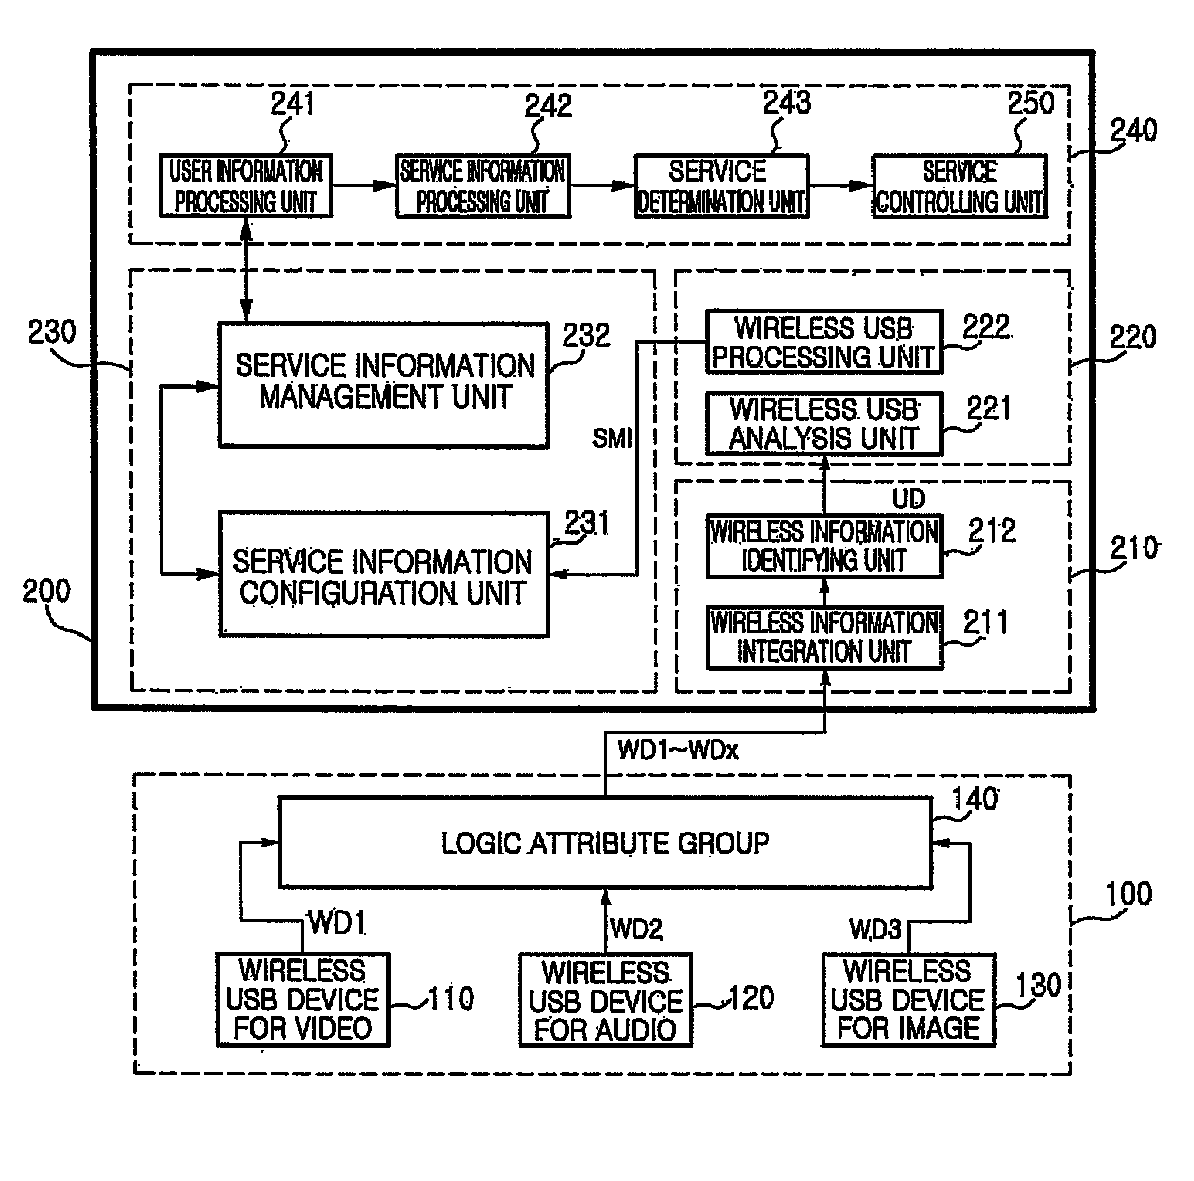 Priority-based wireless USB transfer service management apparatus and method thereof